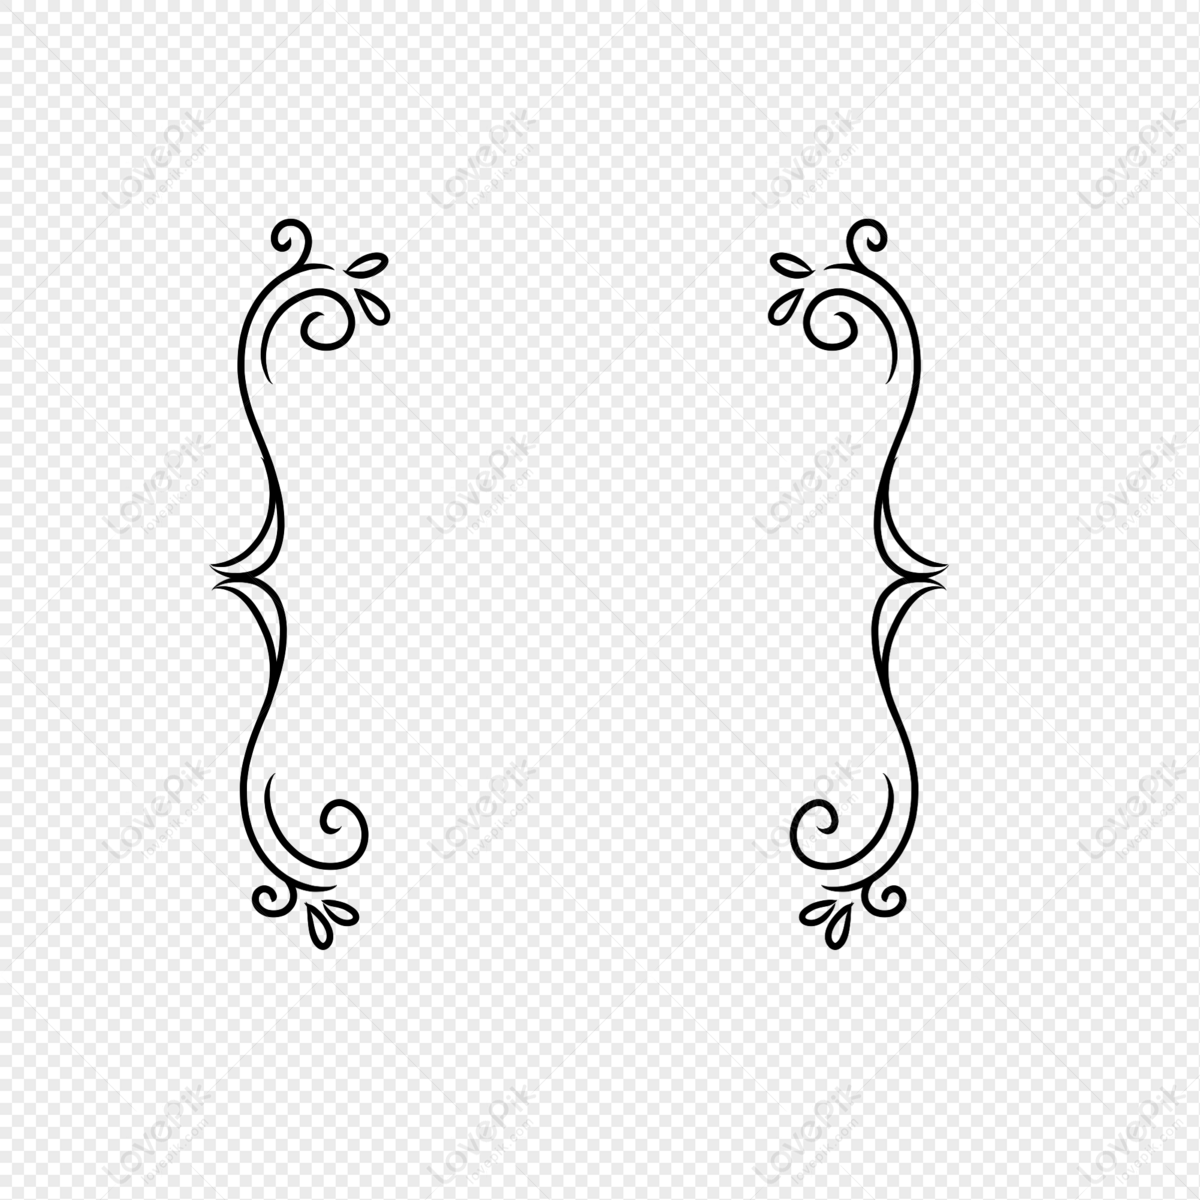 Black Lace Brackets PNG Transparent Image And Clipart Image For